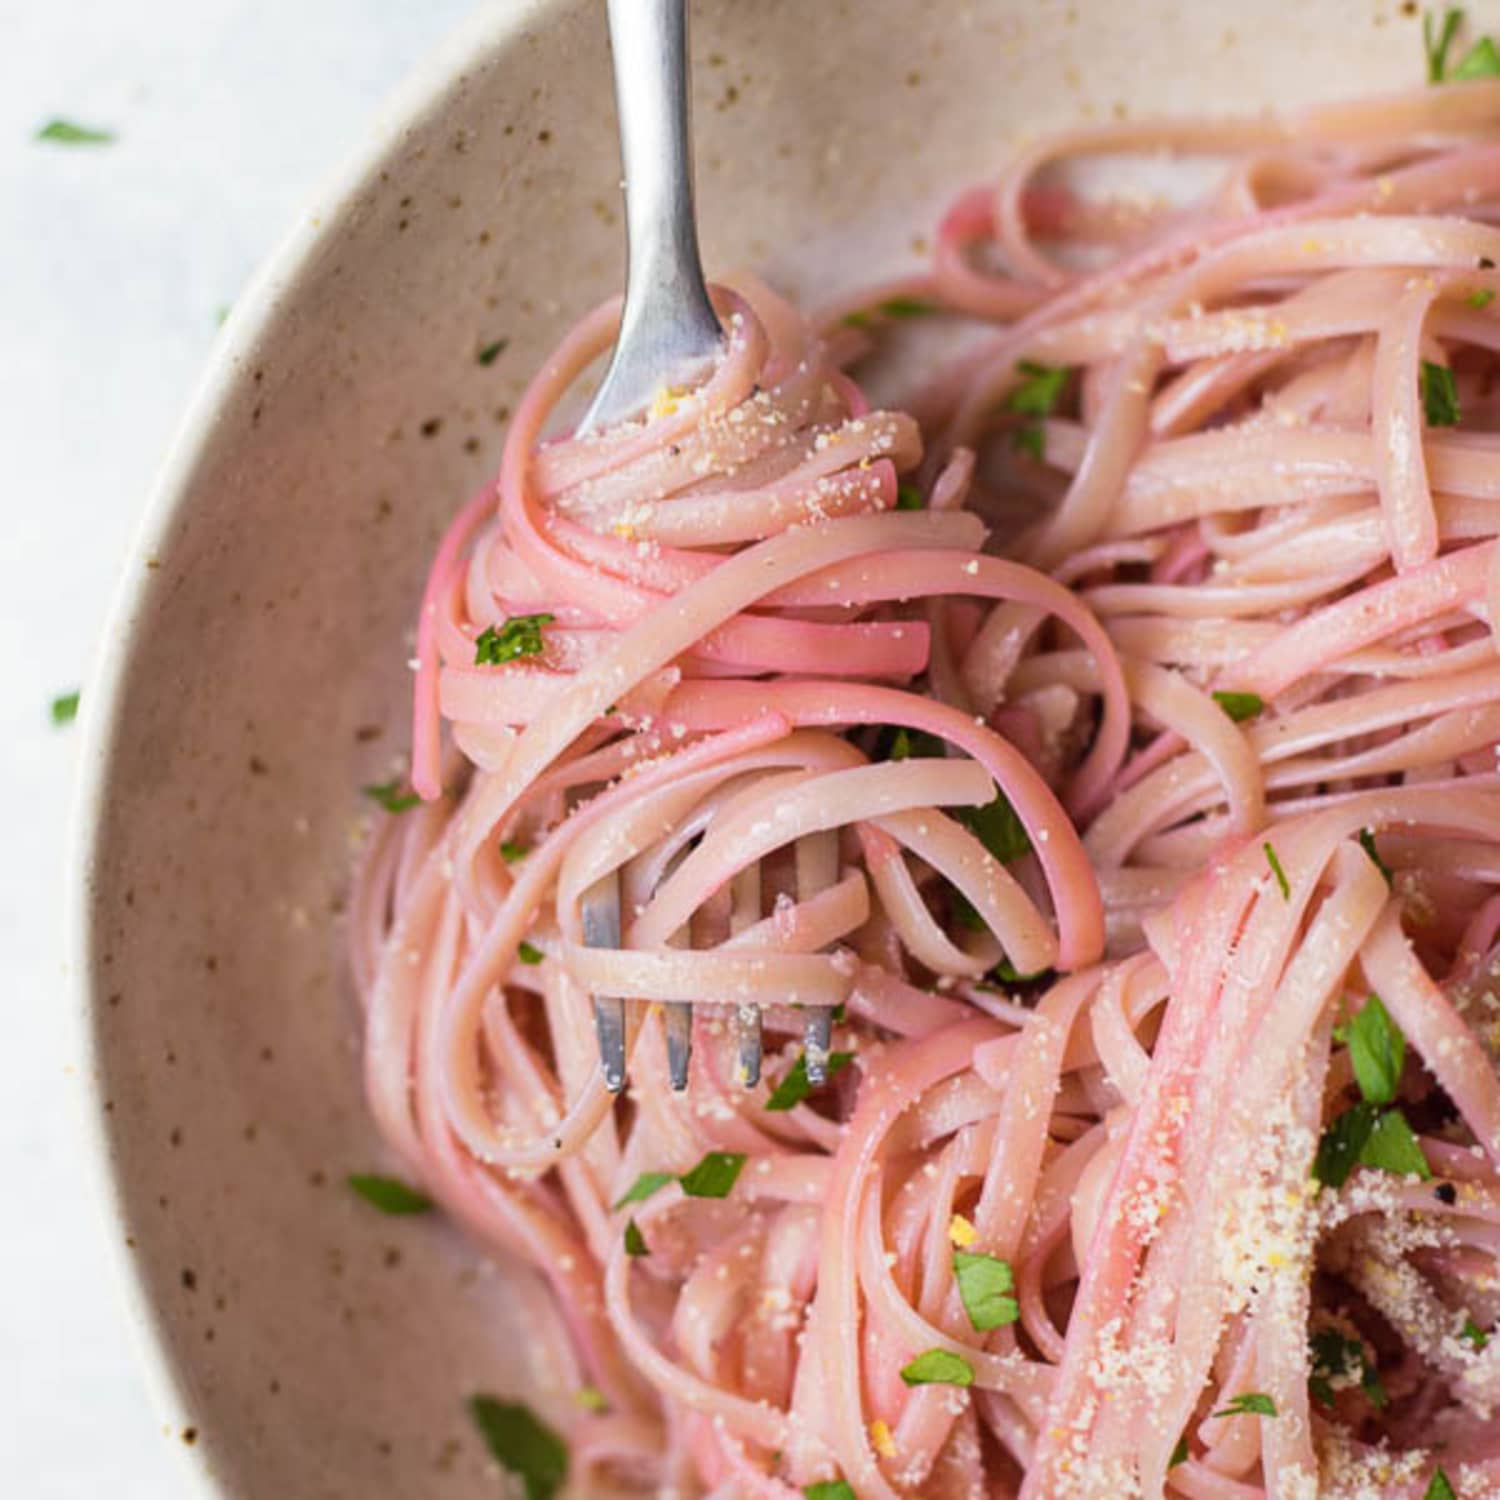 This Pretty Pink Pasta Changes Colors Before Your Eyes